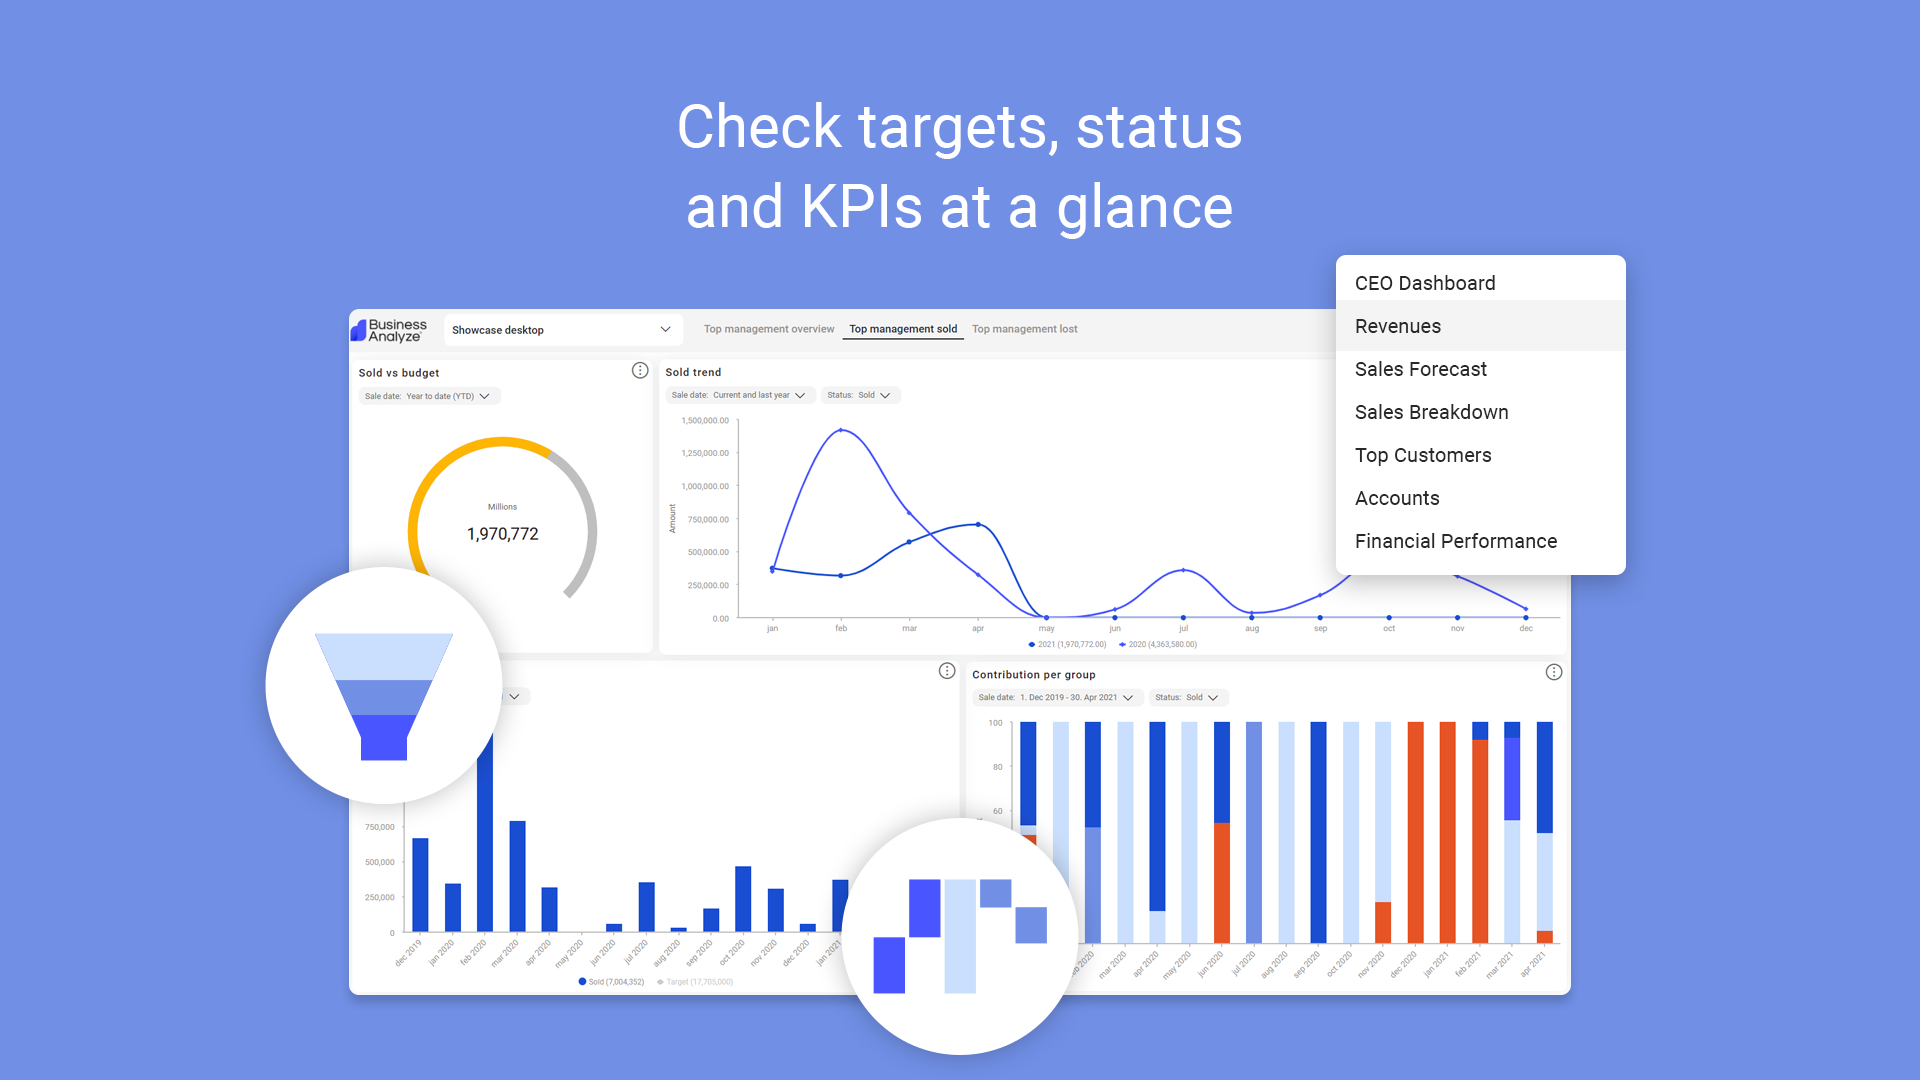 3. Check targets, status and KPIs at a glance.